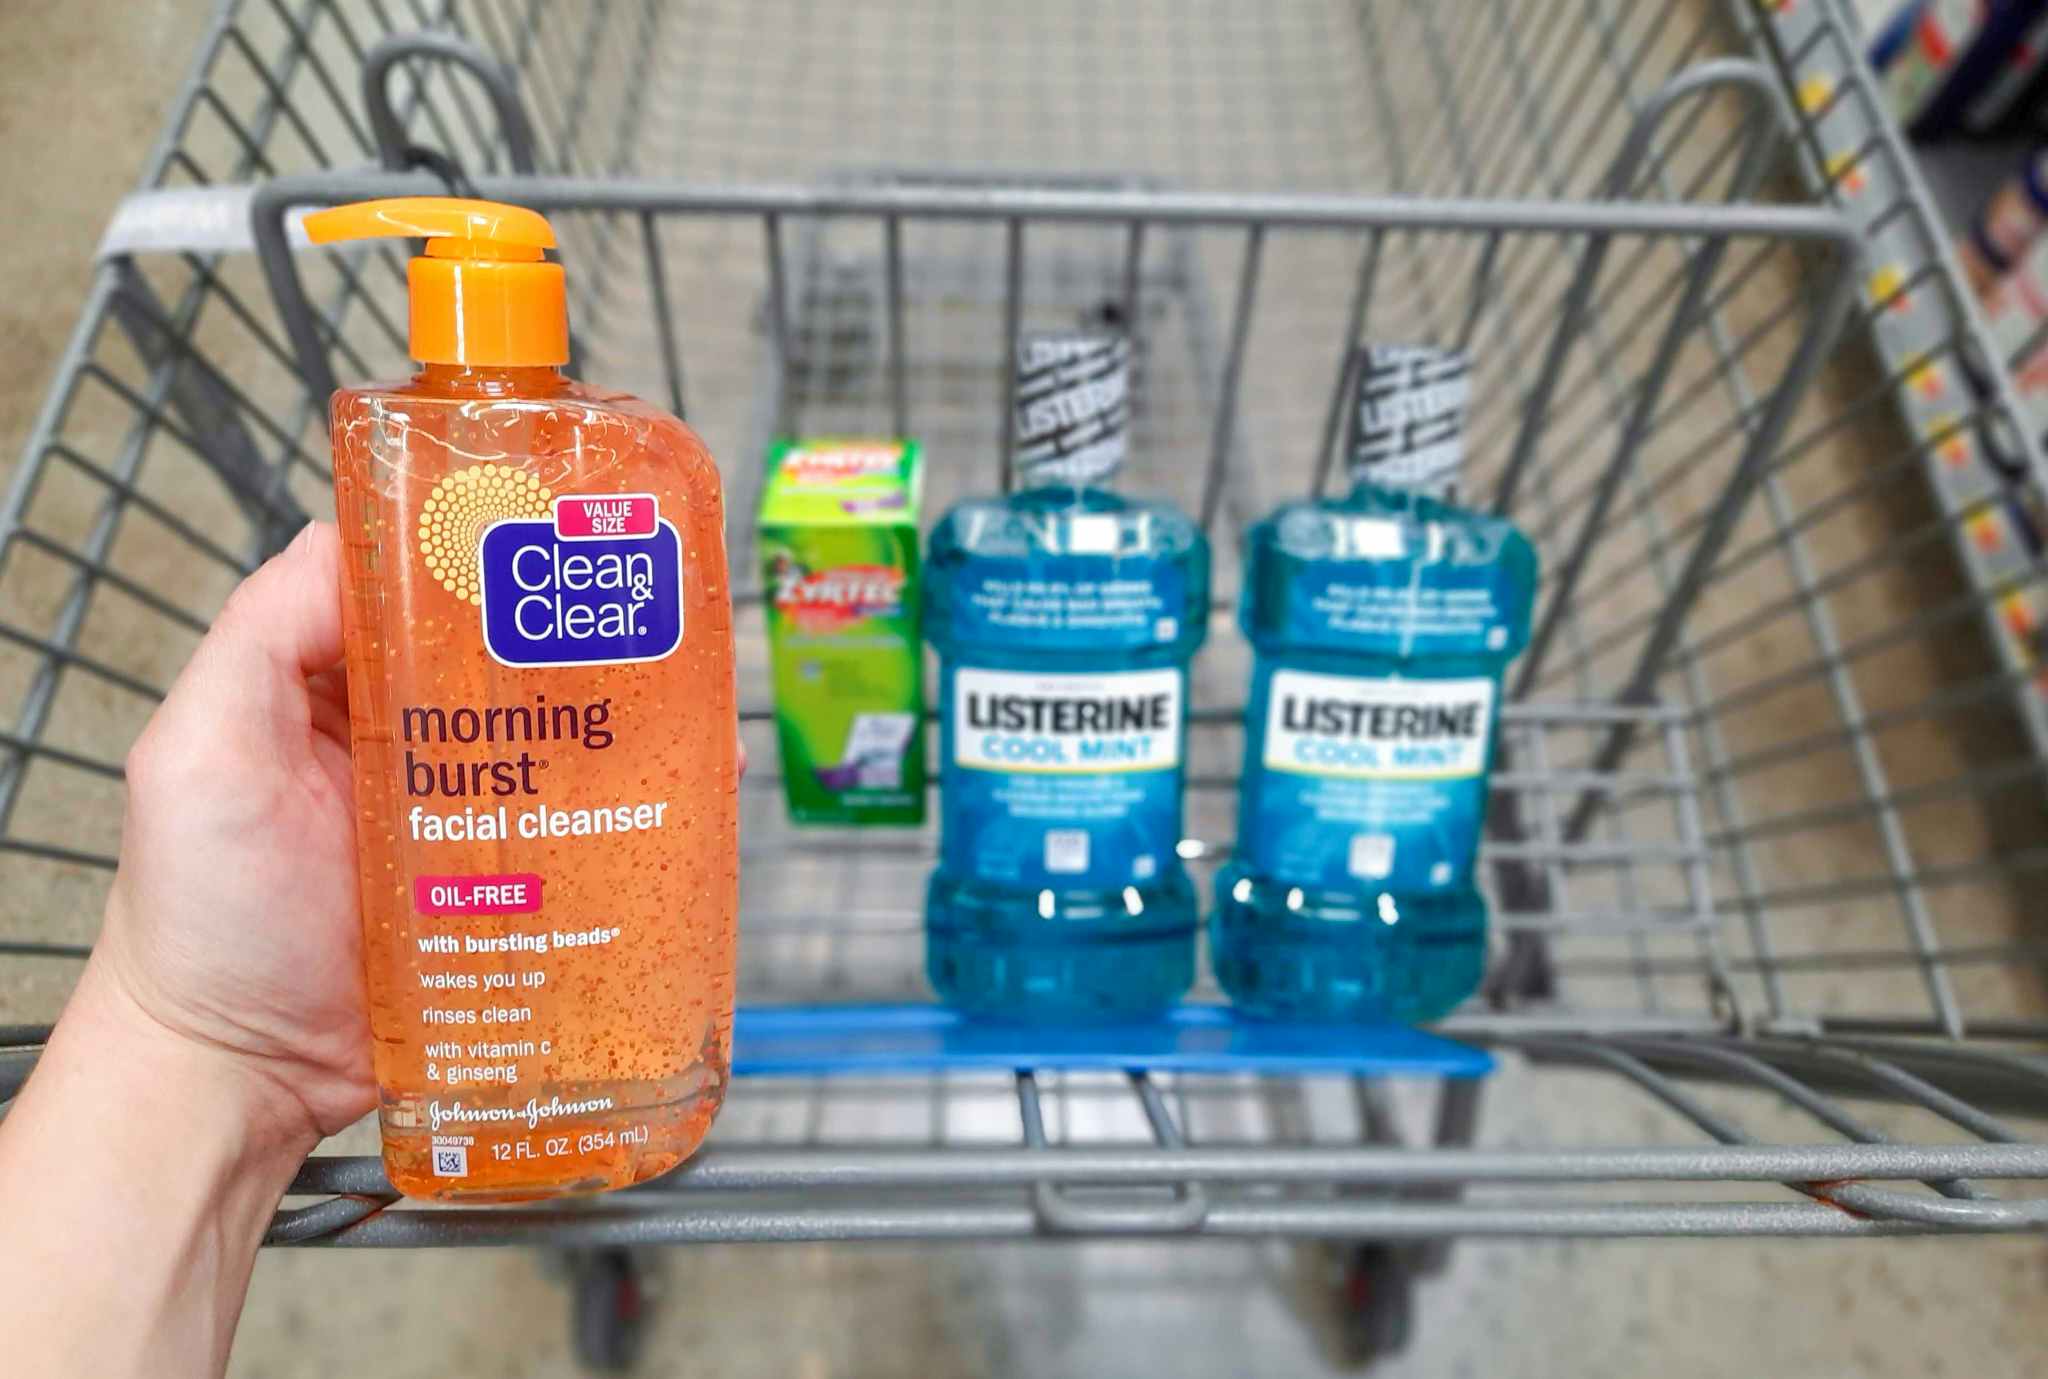 Clean and Clear product held over Walmart shopping cart filled with Zyrtec and Listerine products.